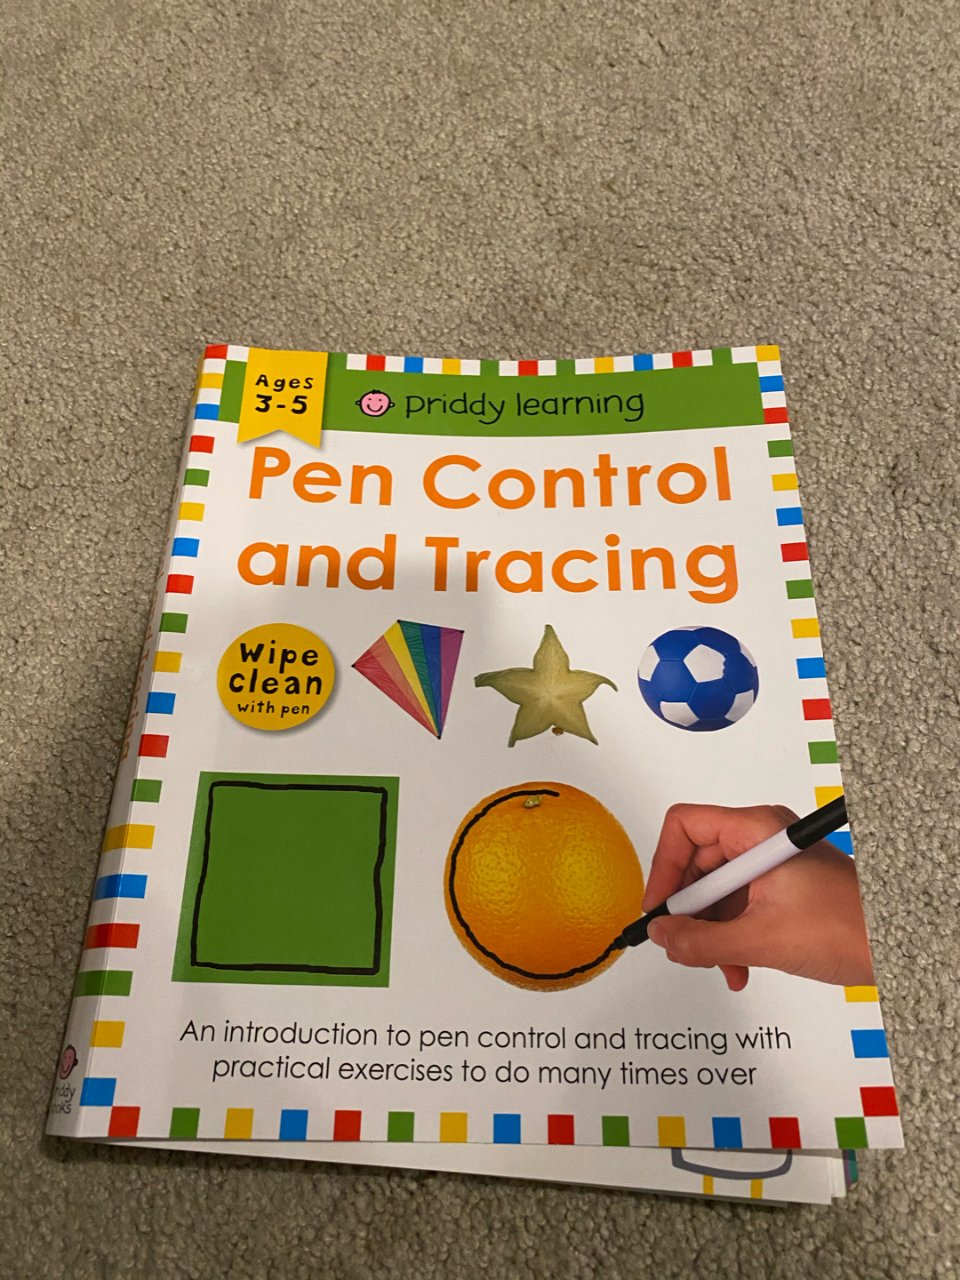 Target 塔吉特百货,Pen Control And Tracing : Wipe Clean Wit